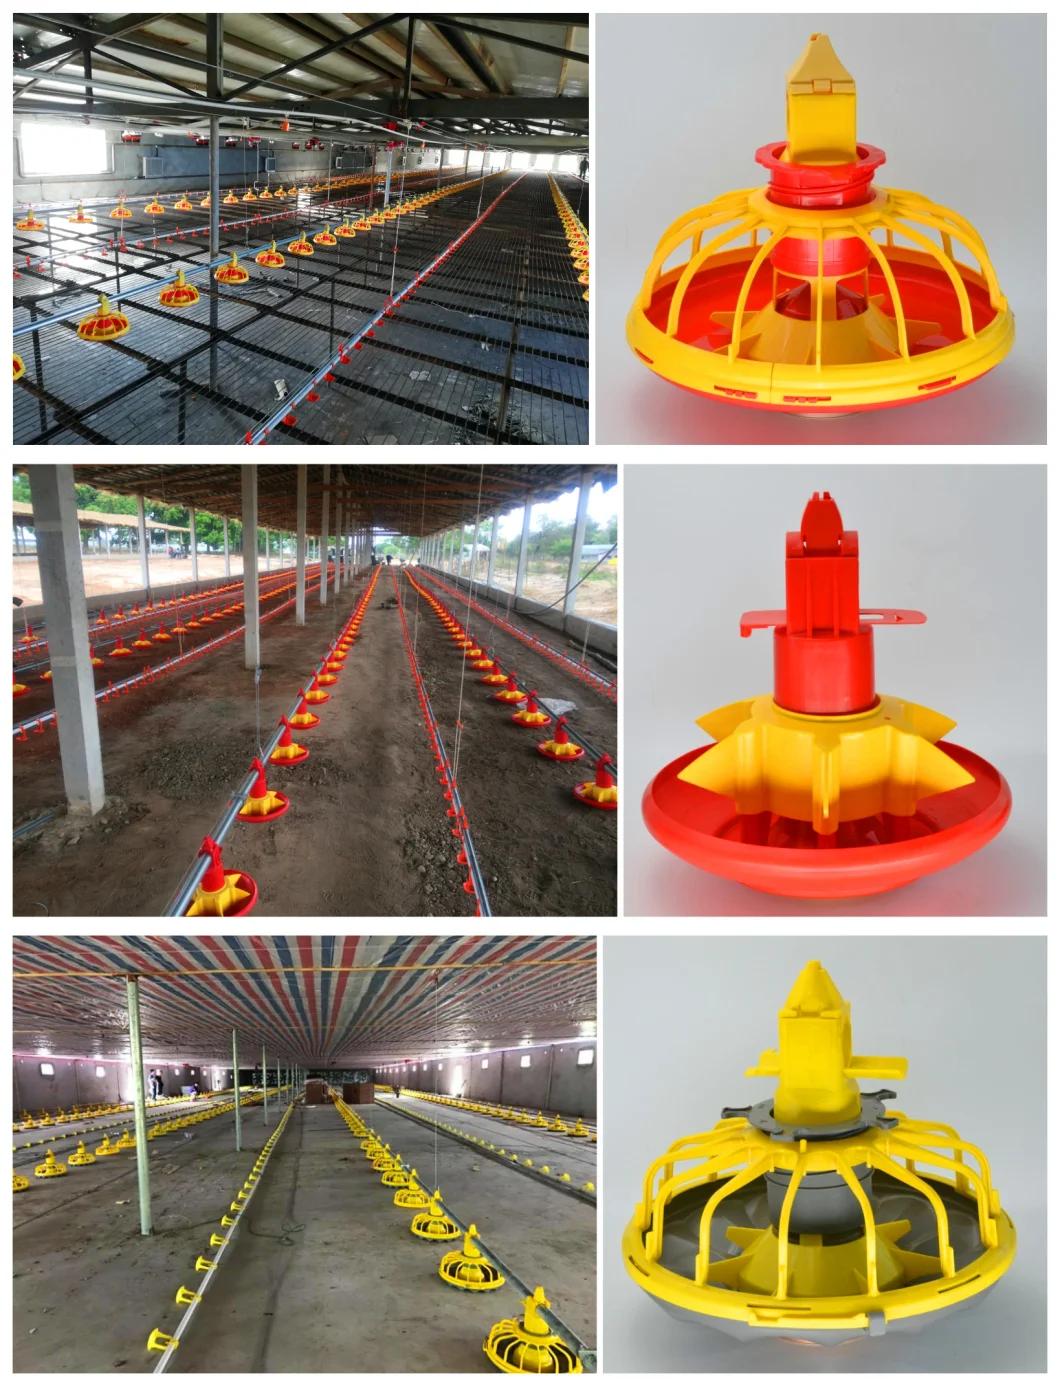 Complete Automatic Chicken Shed Farm Equipment Poultry Farming Equipment for Broiler Birds